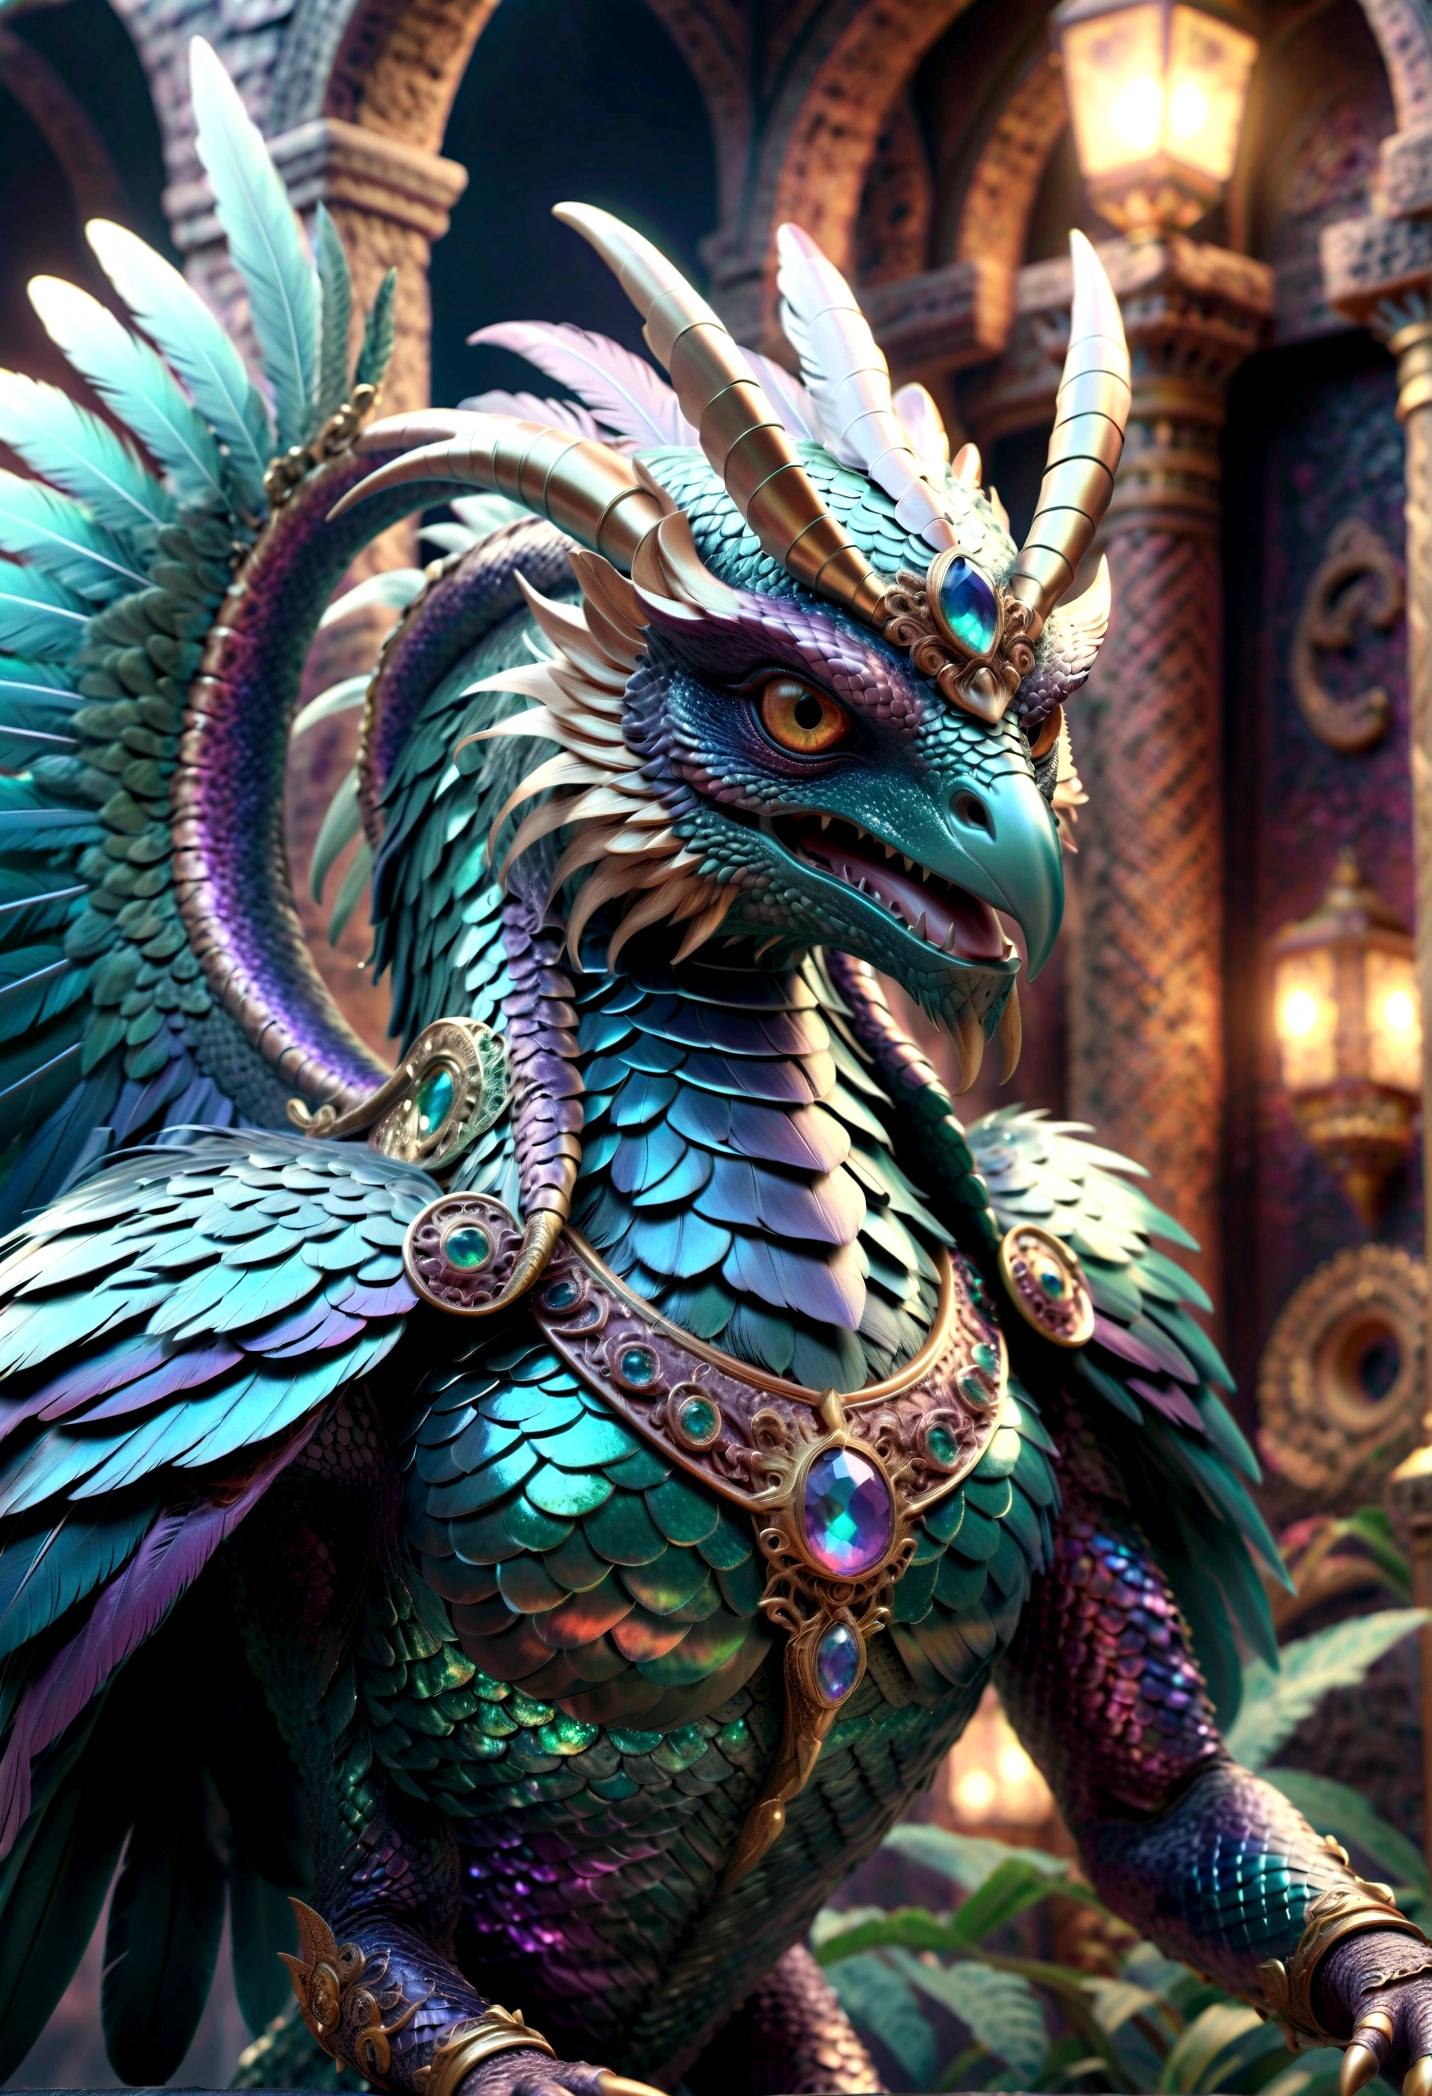 A feathered serpent-bodied monster with a bird-like head, highly detailed, photorealistic, 8K, HDR, cinematic lighting, dramatic lighting, intricate scales, iridescent feathers, fierce expression, sharp talons, coiled body, dramatic pose, dark fantasy, muted colors, moody atmosphere